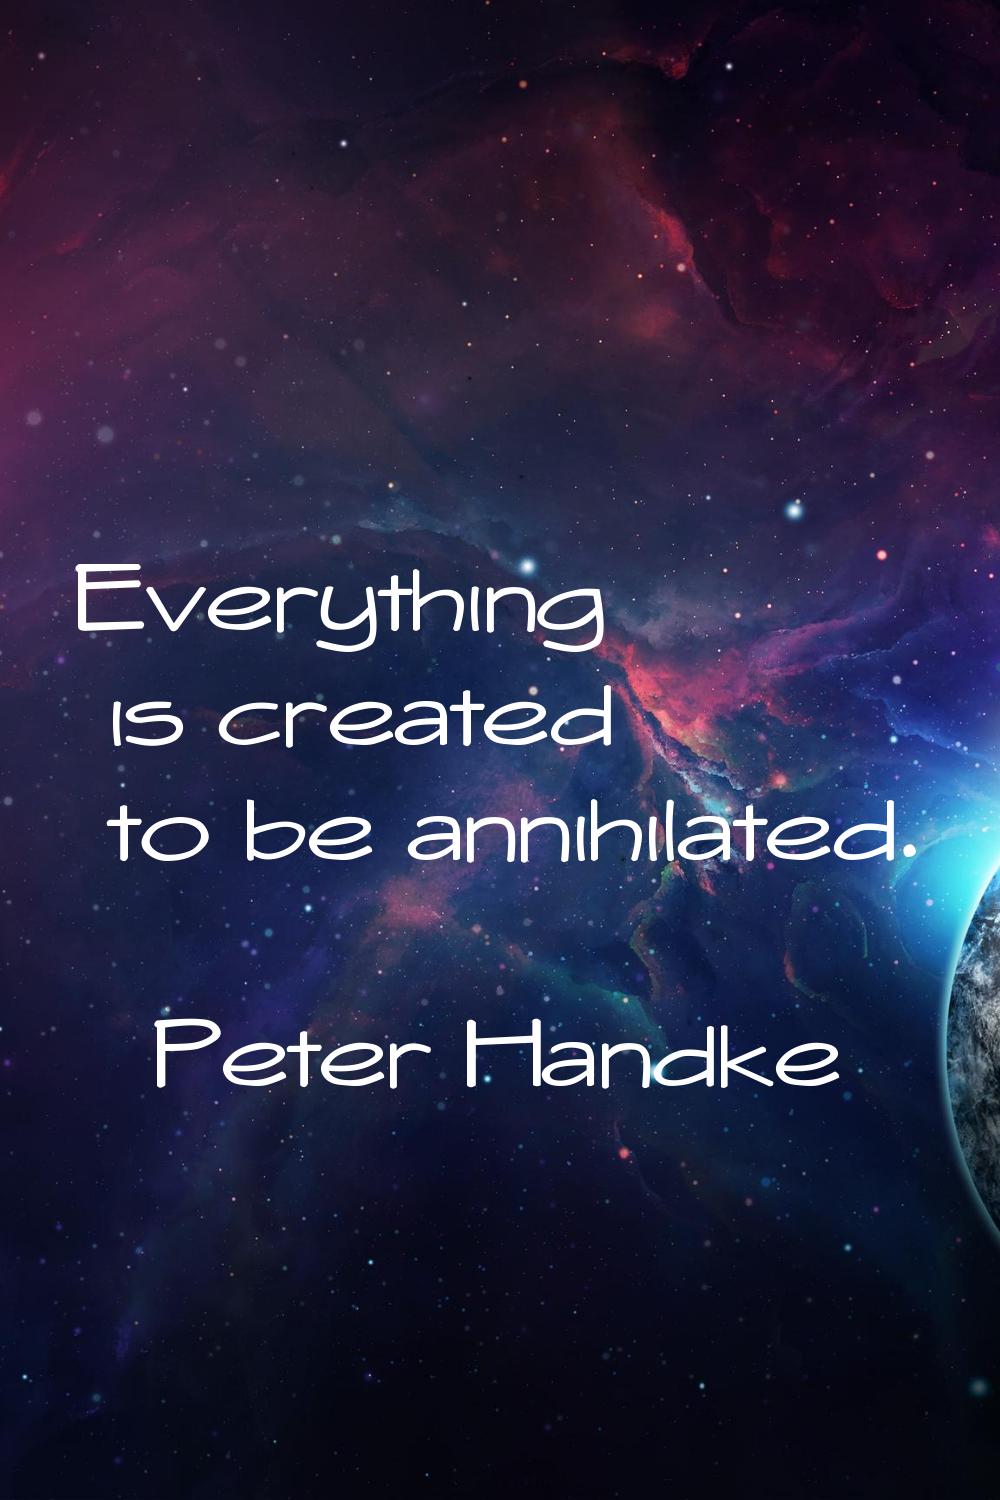 Everything is created to be annihilated.